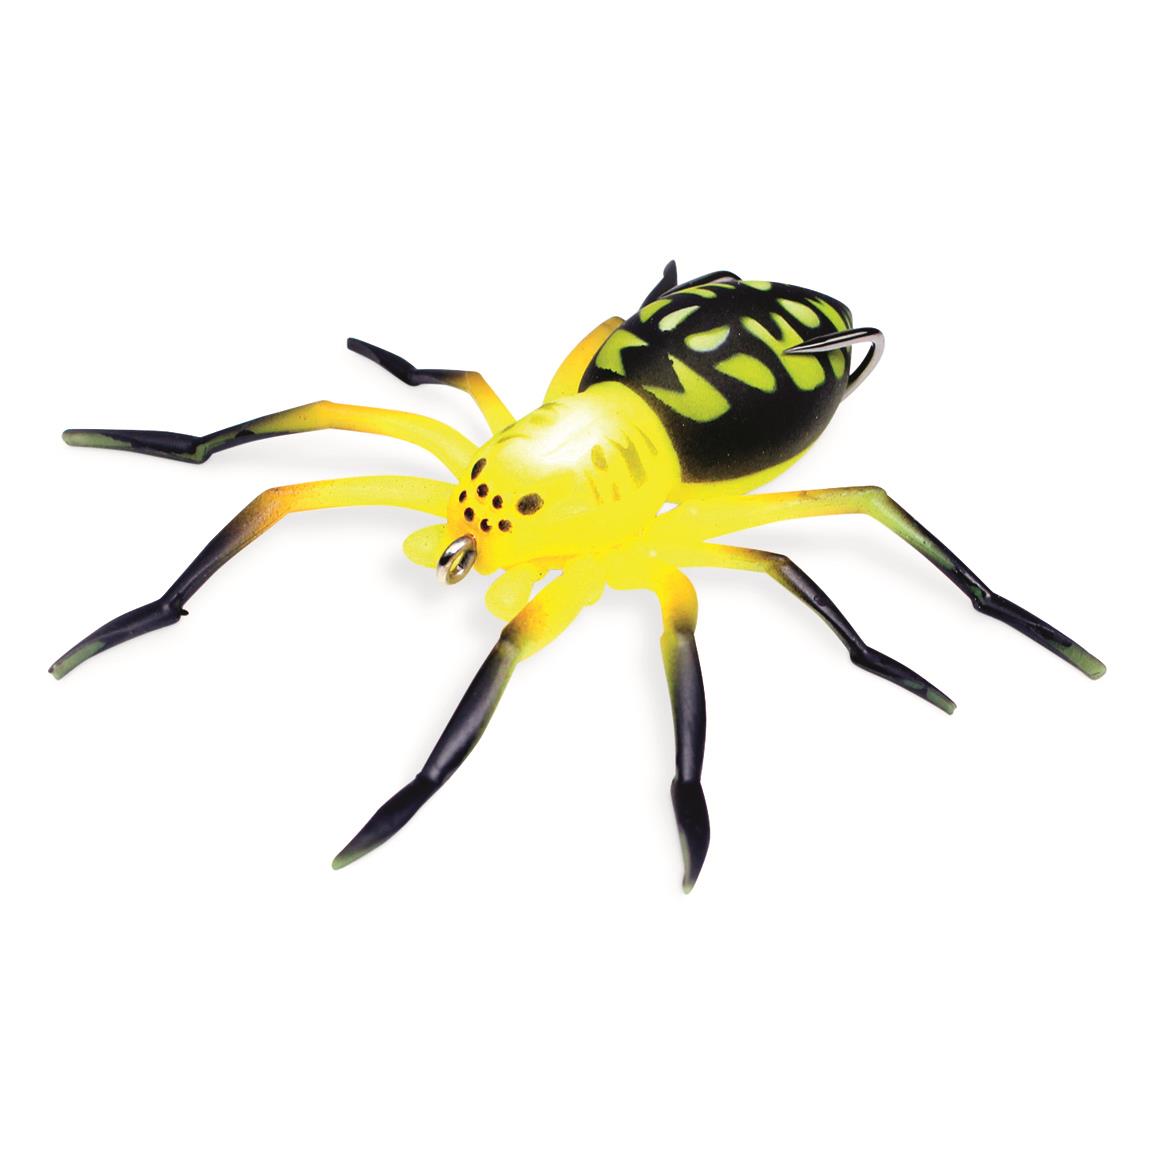 Lunkerhunt Hollow Body Phantom Spider Lure - 733239, Top Water Baits at  Sportsman's Guide